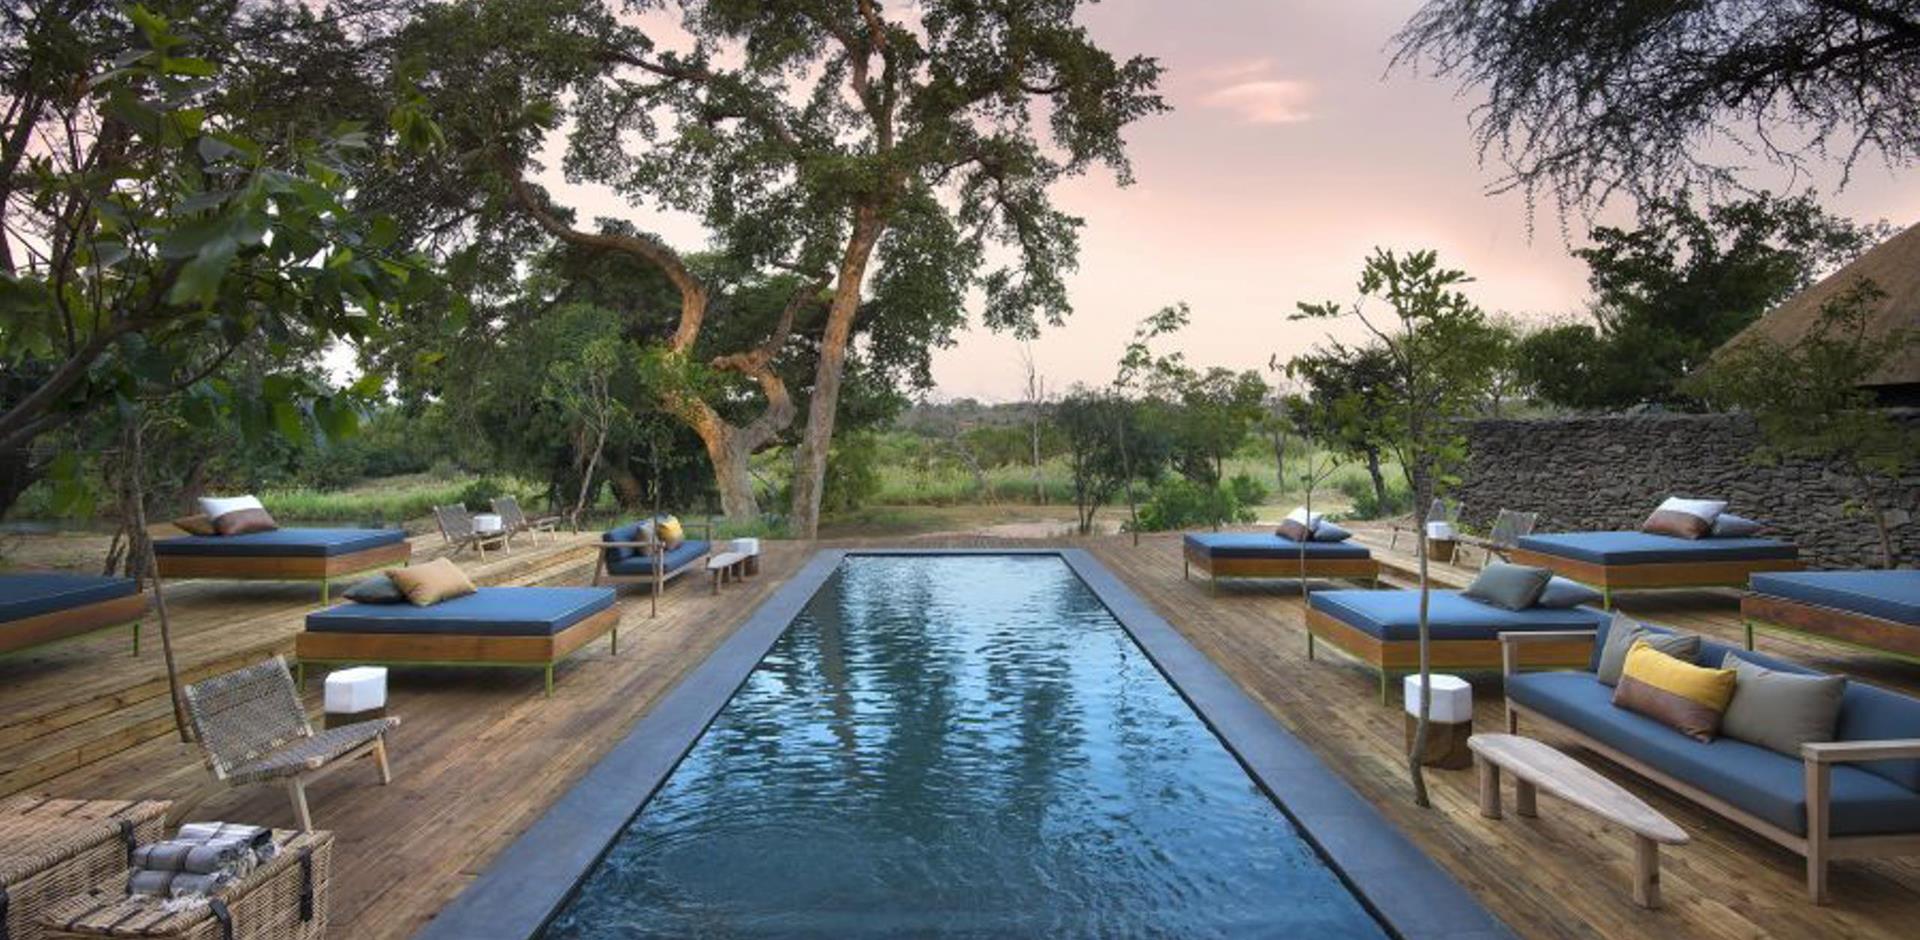 Pool, Lion Sands River Lodge, South Africa, A&K